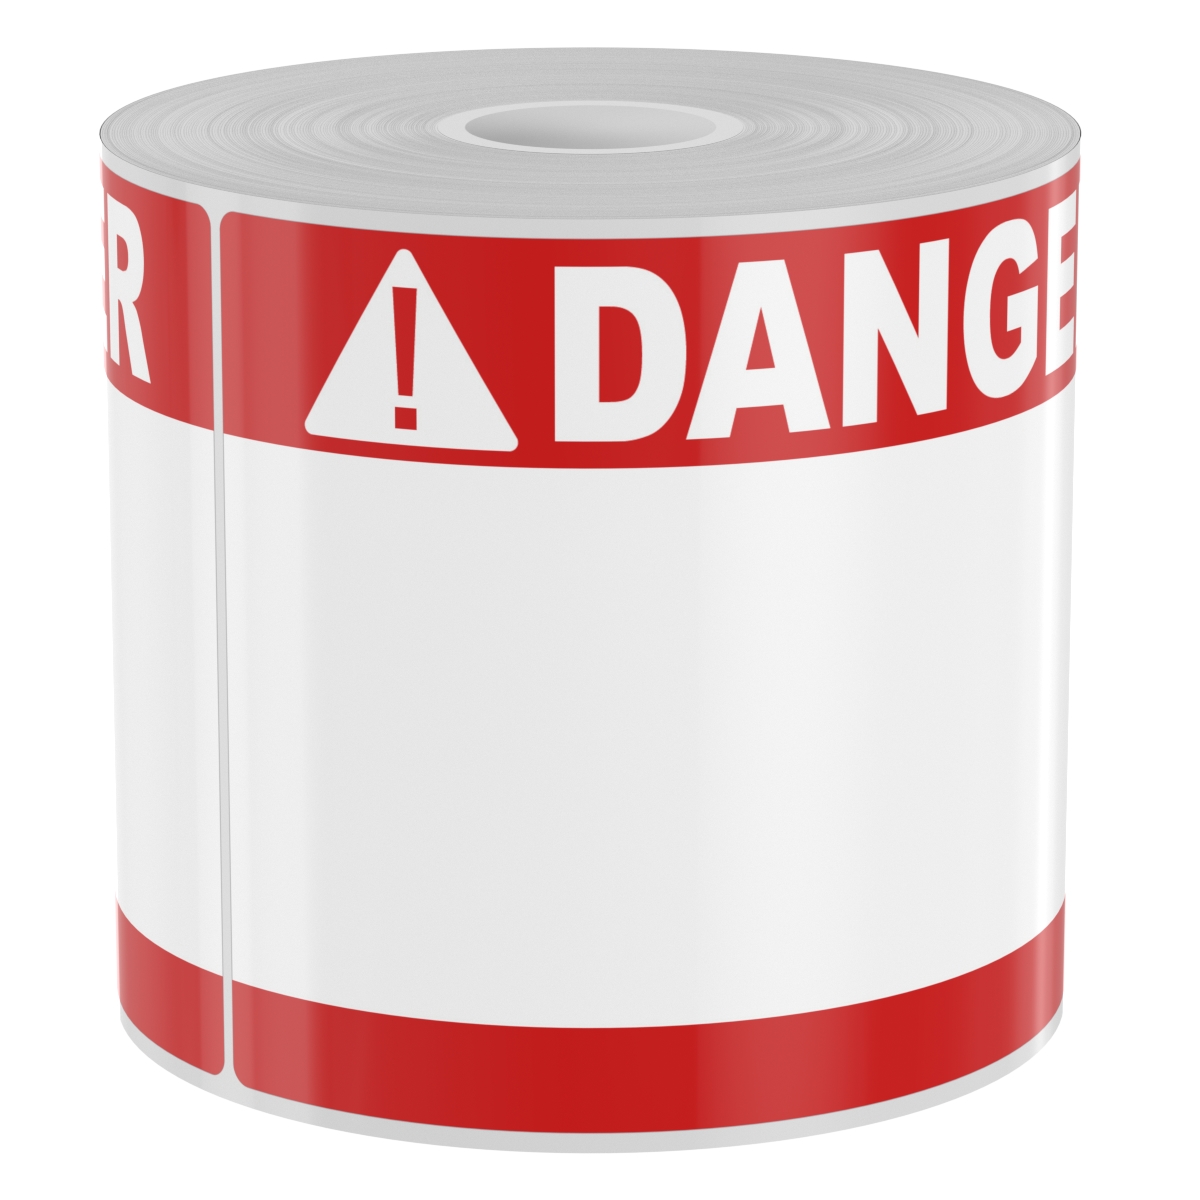 Detail view for 250 4" x 6" High-Performance Die-Cut Red Double Band White Danger